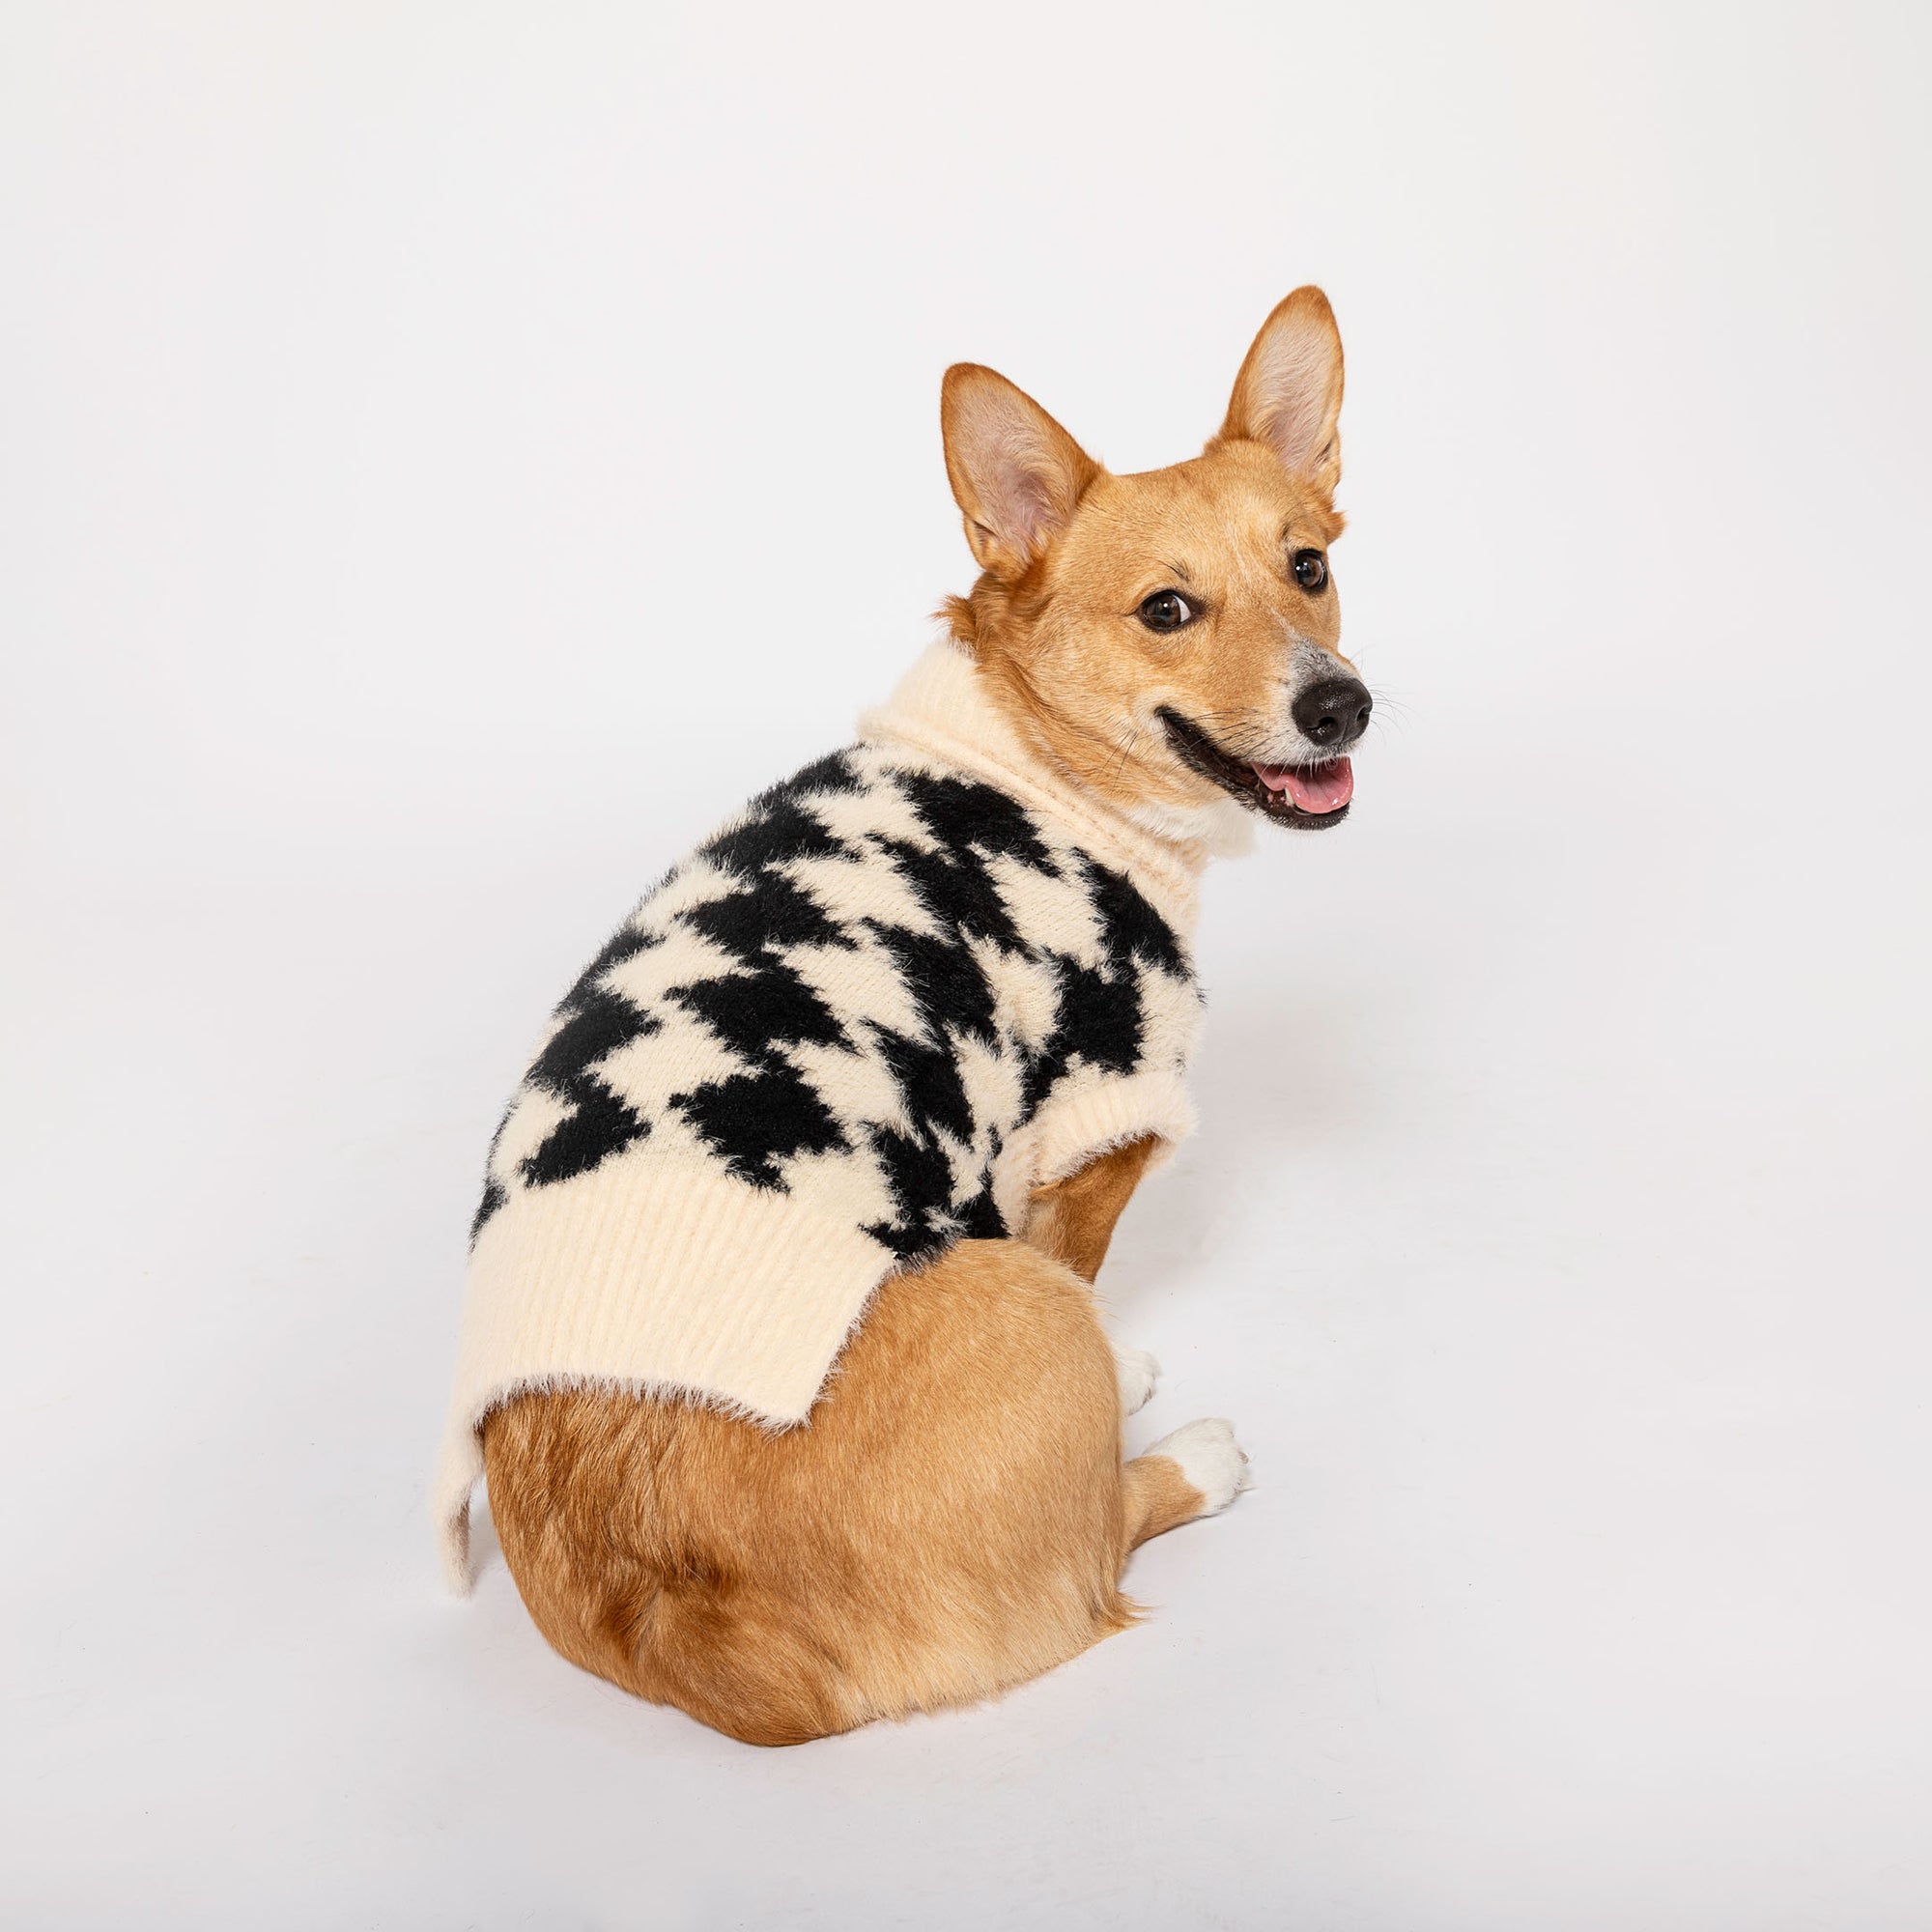 Cheerful Corgi dog seated in profile, donning a beige houndstooth sweater, glancing back with a happy expression, against a white background.